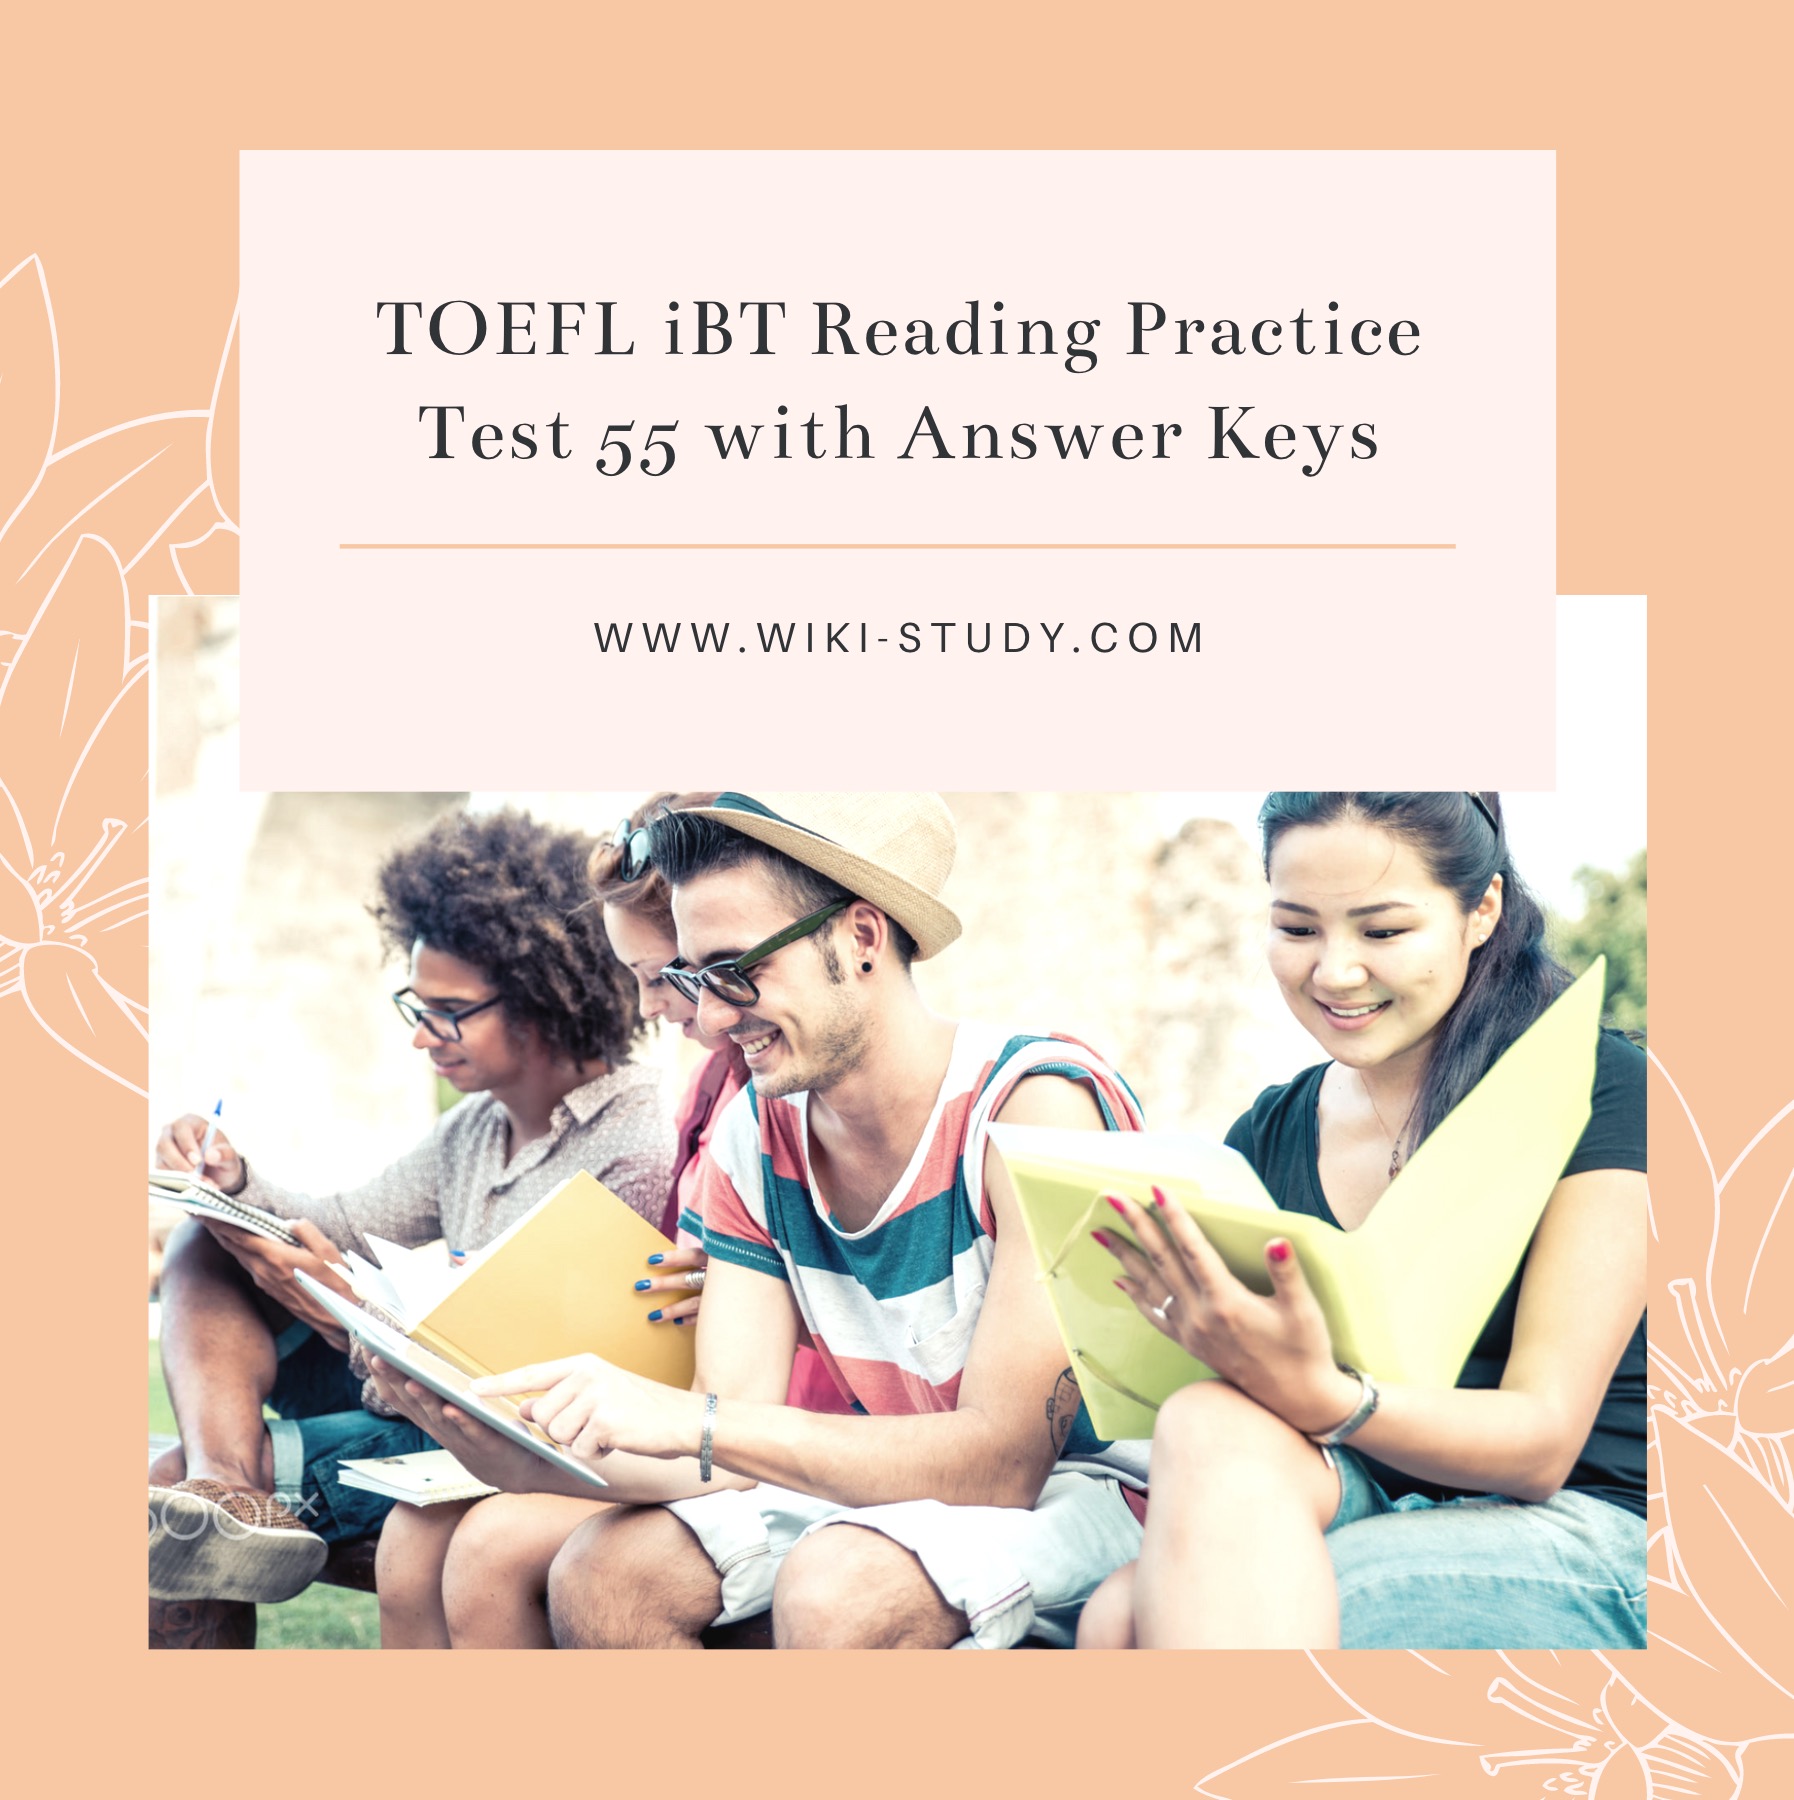 TOEFL iBT Reading Practice Test 55 with Answer Keys